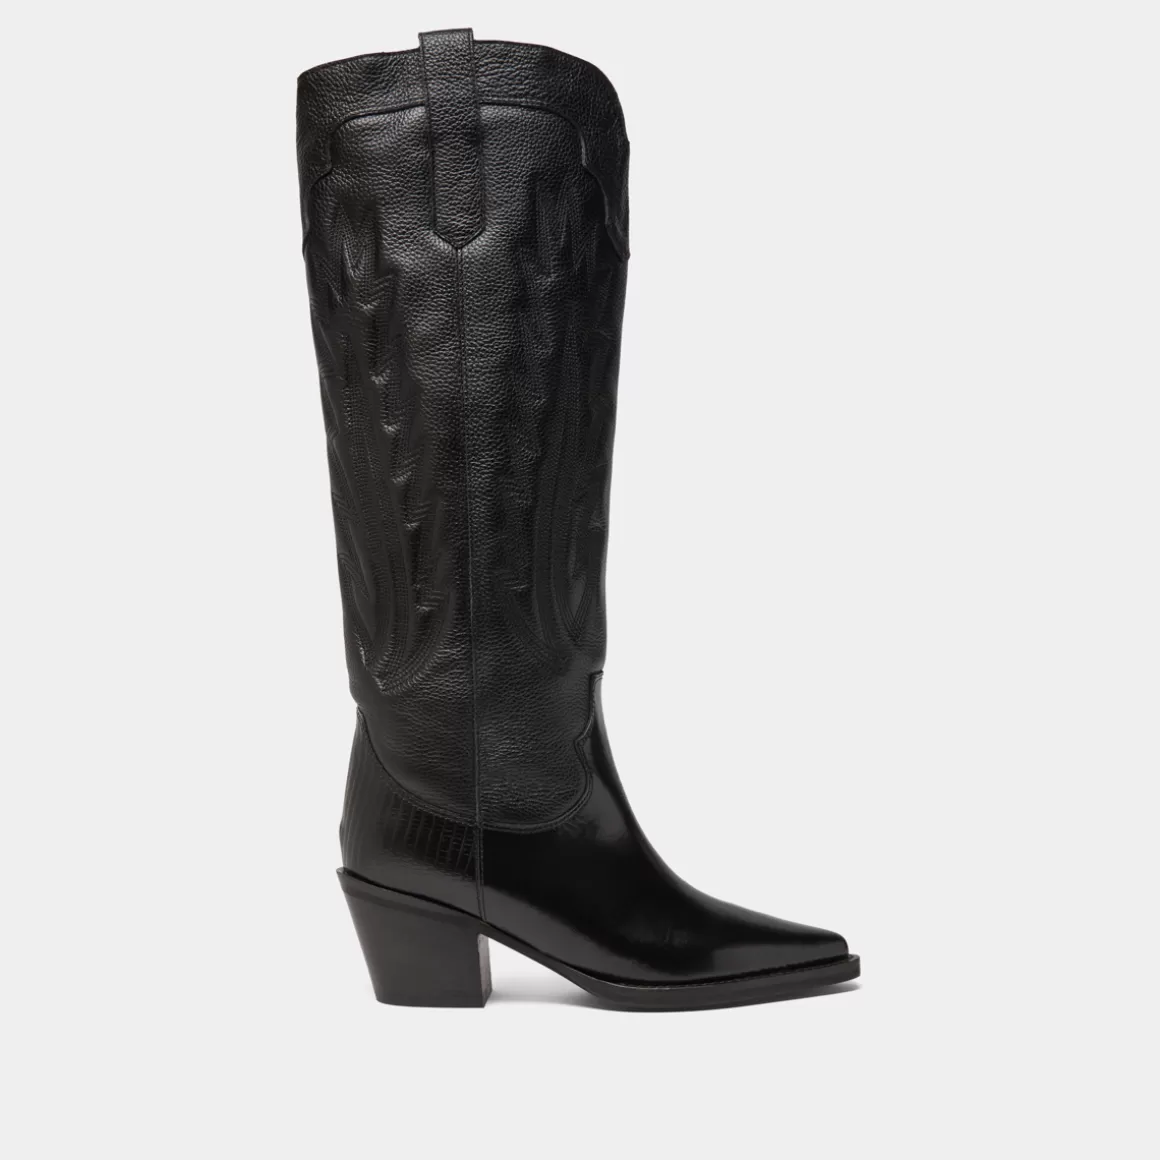 Boots with thick heels and visible stitching<Jonak Outlet